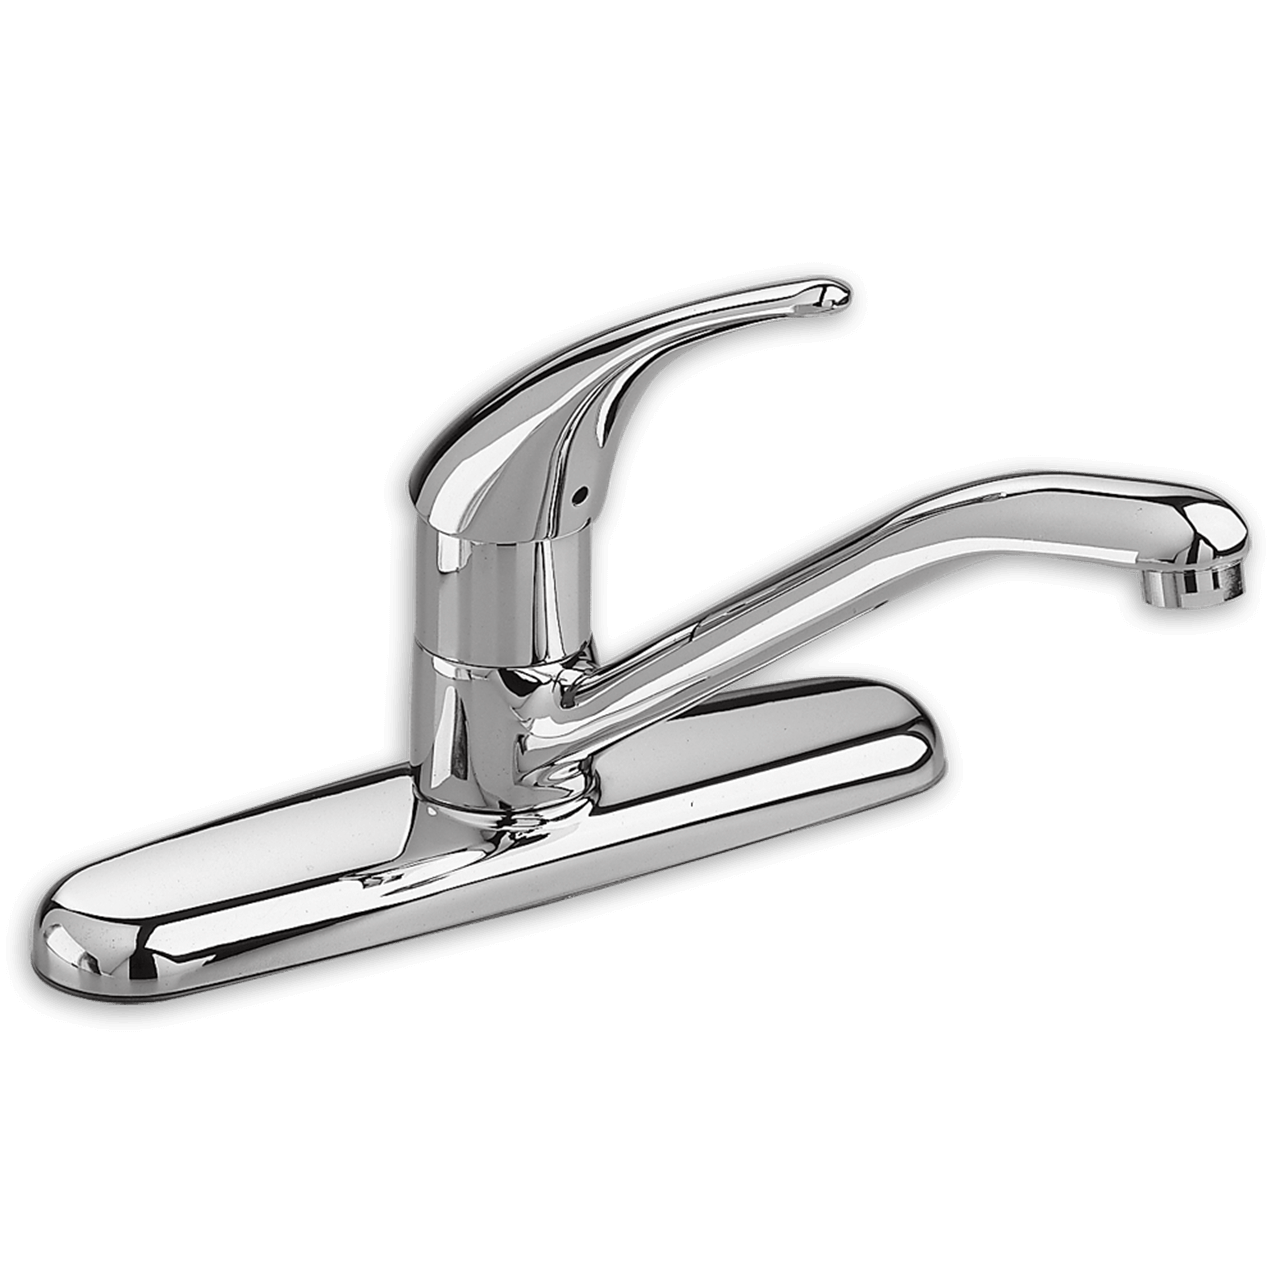 Bathroom United Tap Faucet Standard States American Clipart